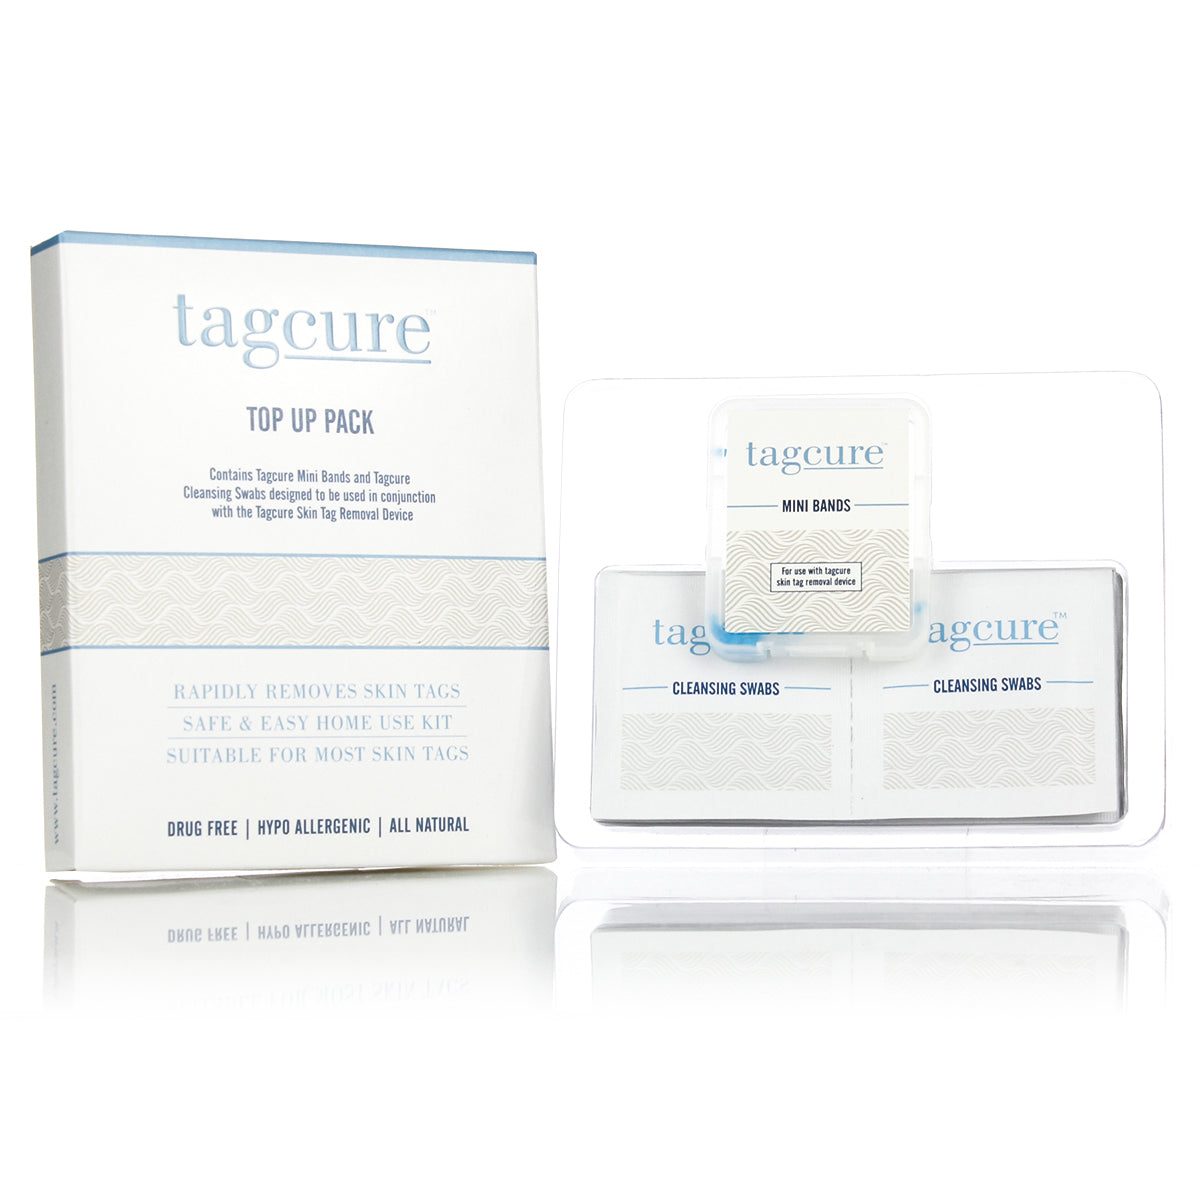 Tagcure - Top Up Pack - White Packaging